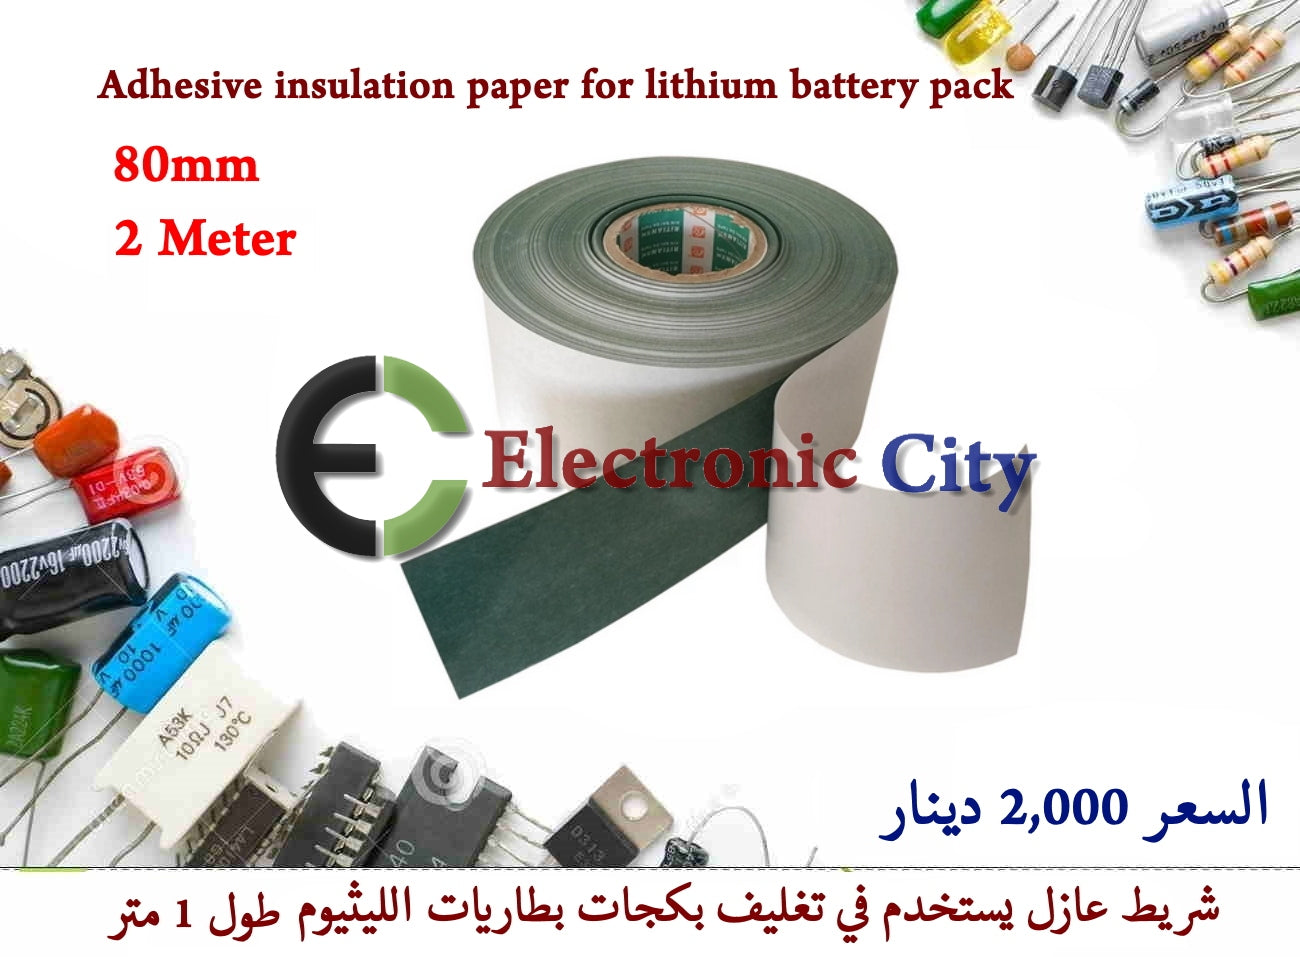 Adhesive insulation paper for lithium battery pack 80mm 2M